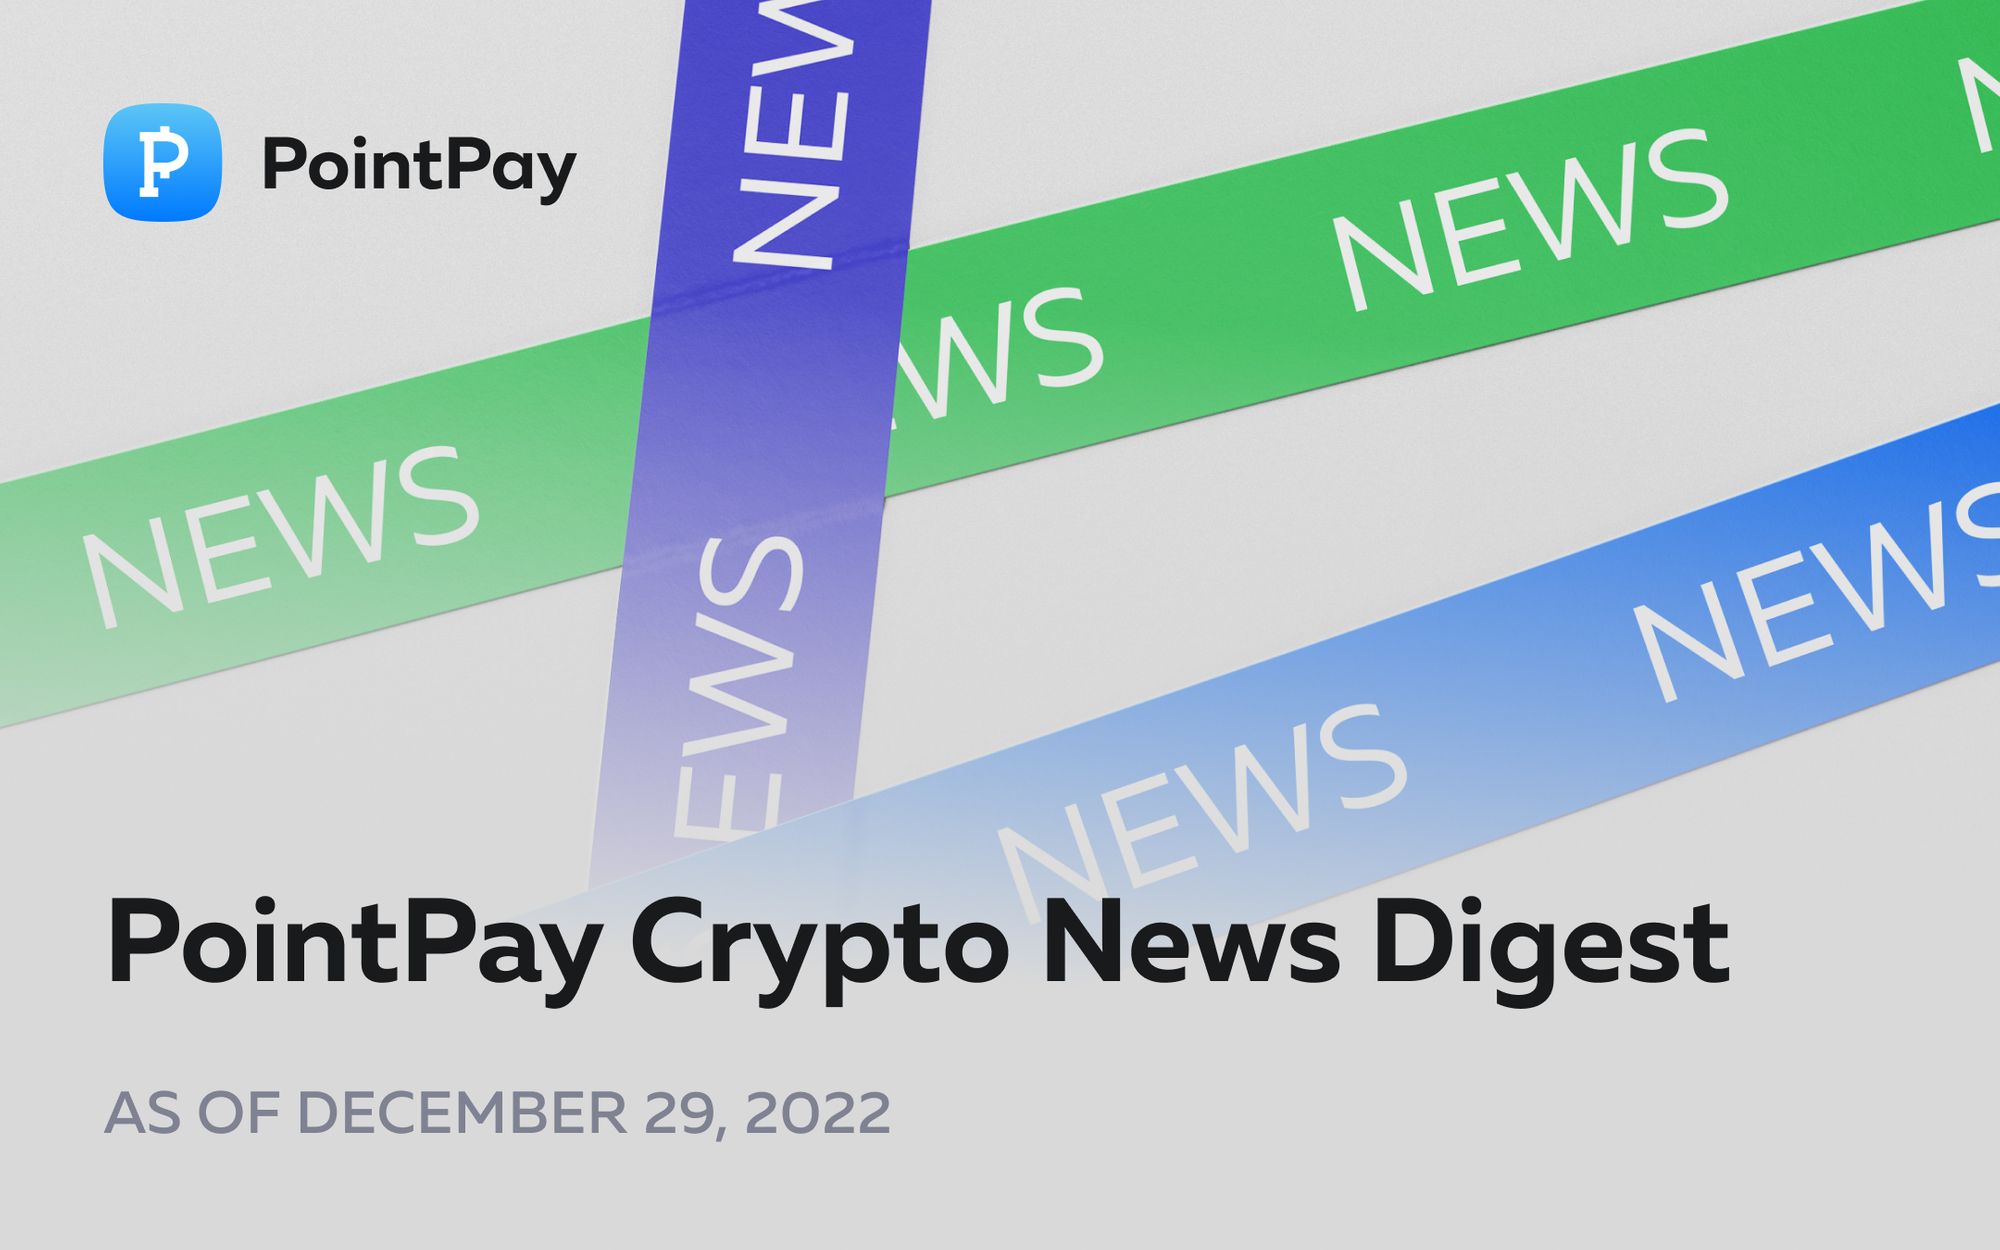 PointPay Crypto News Digest